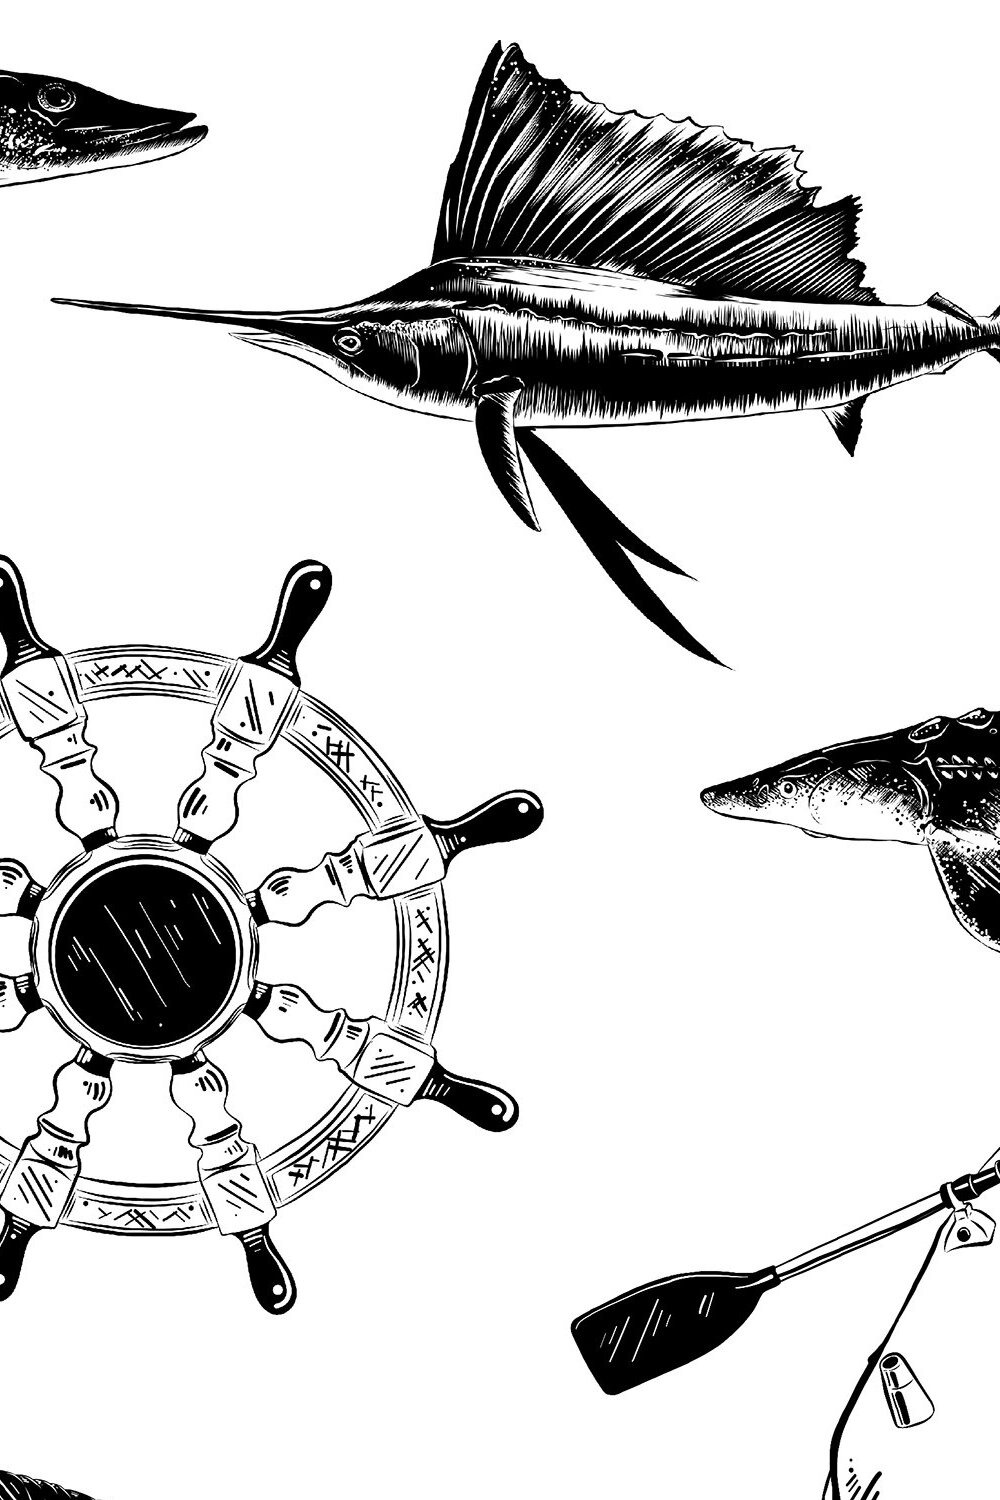 Black and white drawing of fish and paddles.